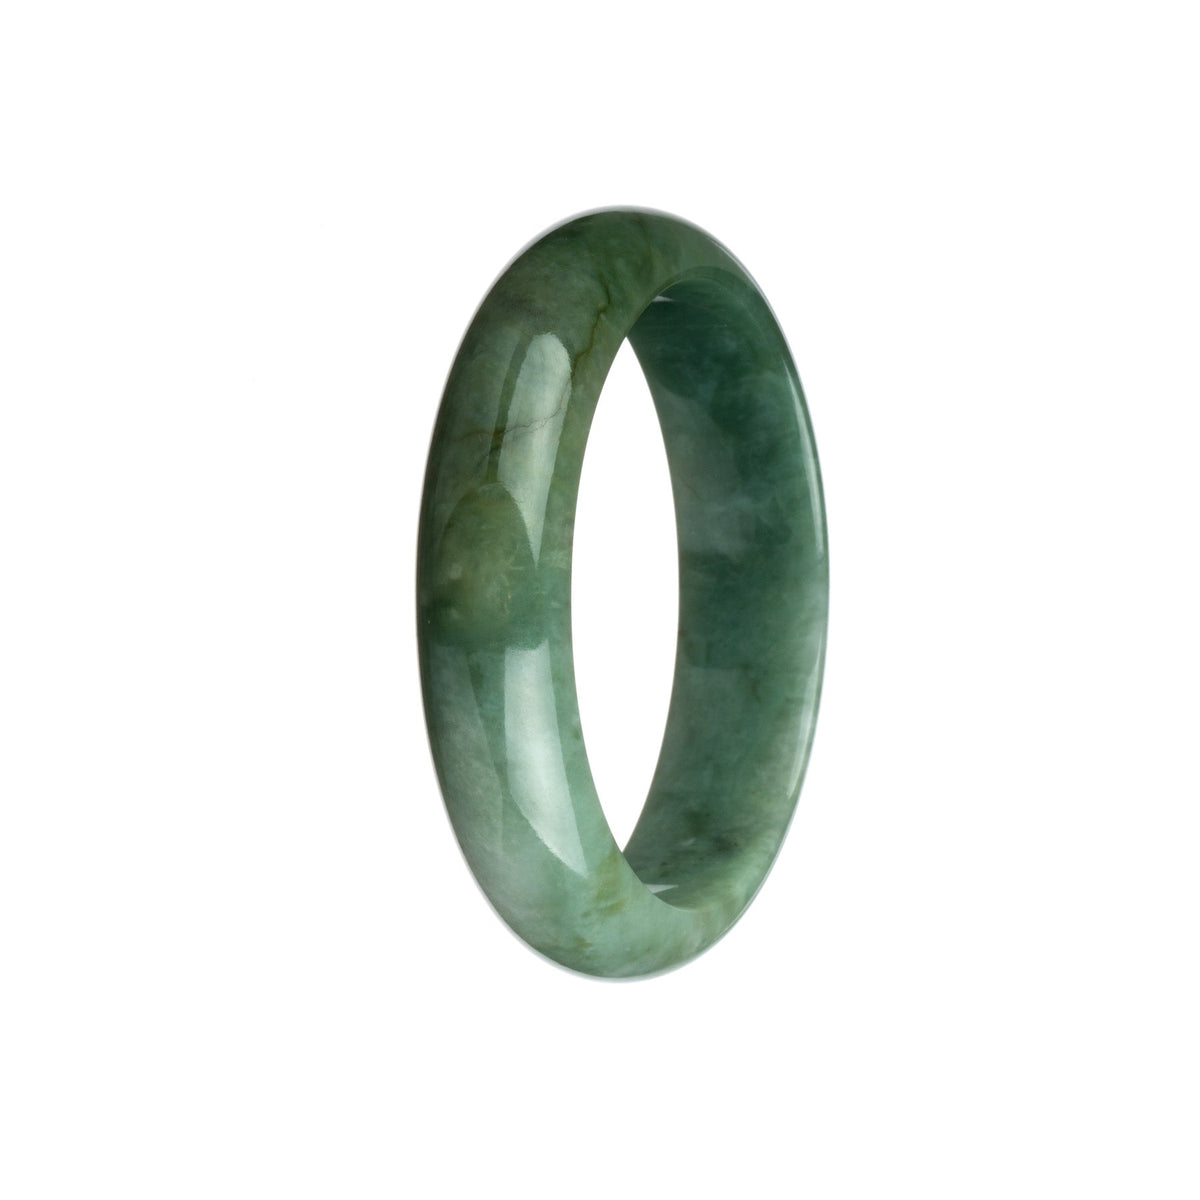 An elegant green jade bracelet with a half moon design, made from authentic Grade A jadeite jade. Perfect for adding a touch of sophistication to any outfit.